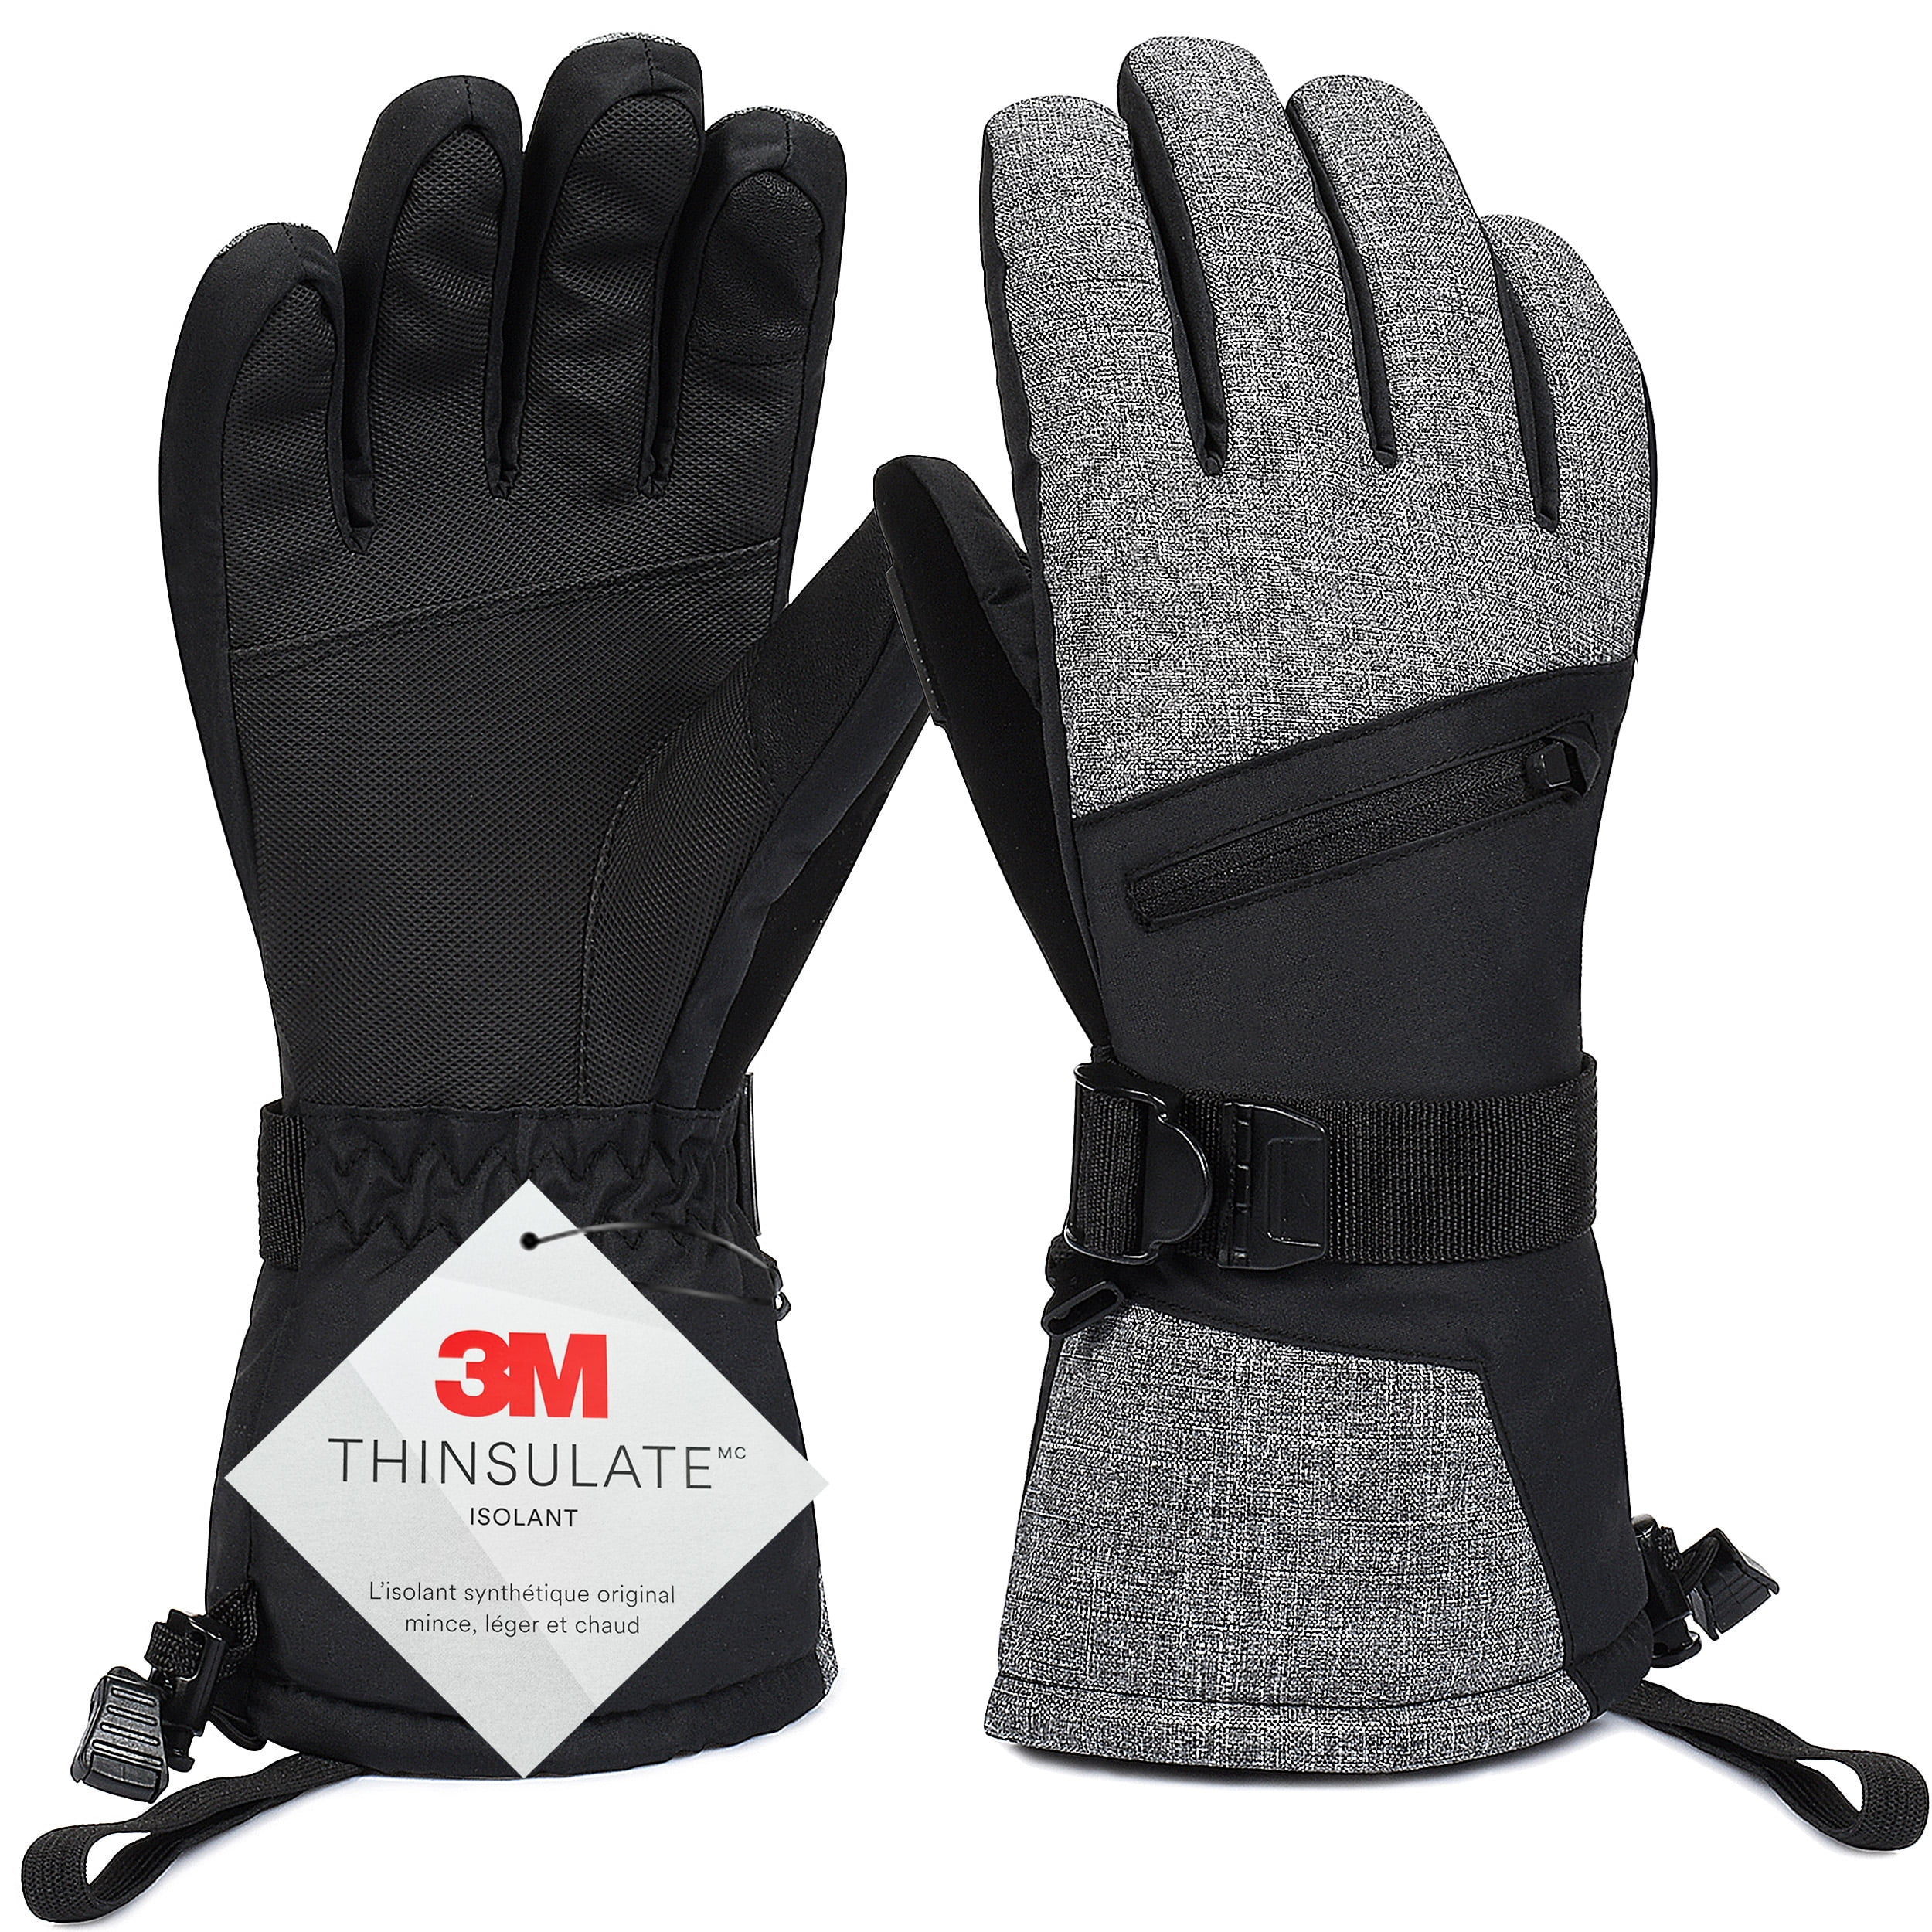 Andake Winter Warm Women Ski Gloves 3M Thinsulate Snow Warm Insulated Windproof Waterproof Gloves for Skiing Snowboarding and Skating